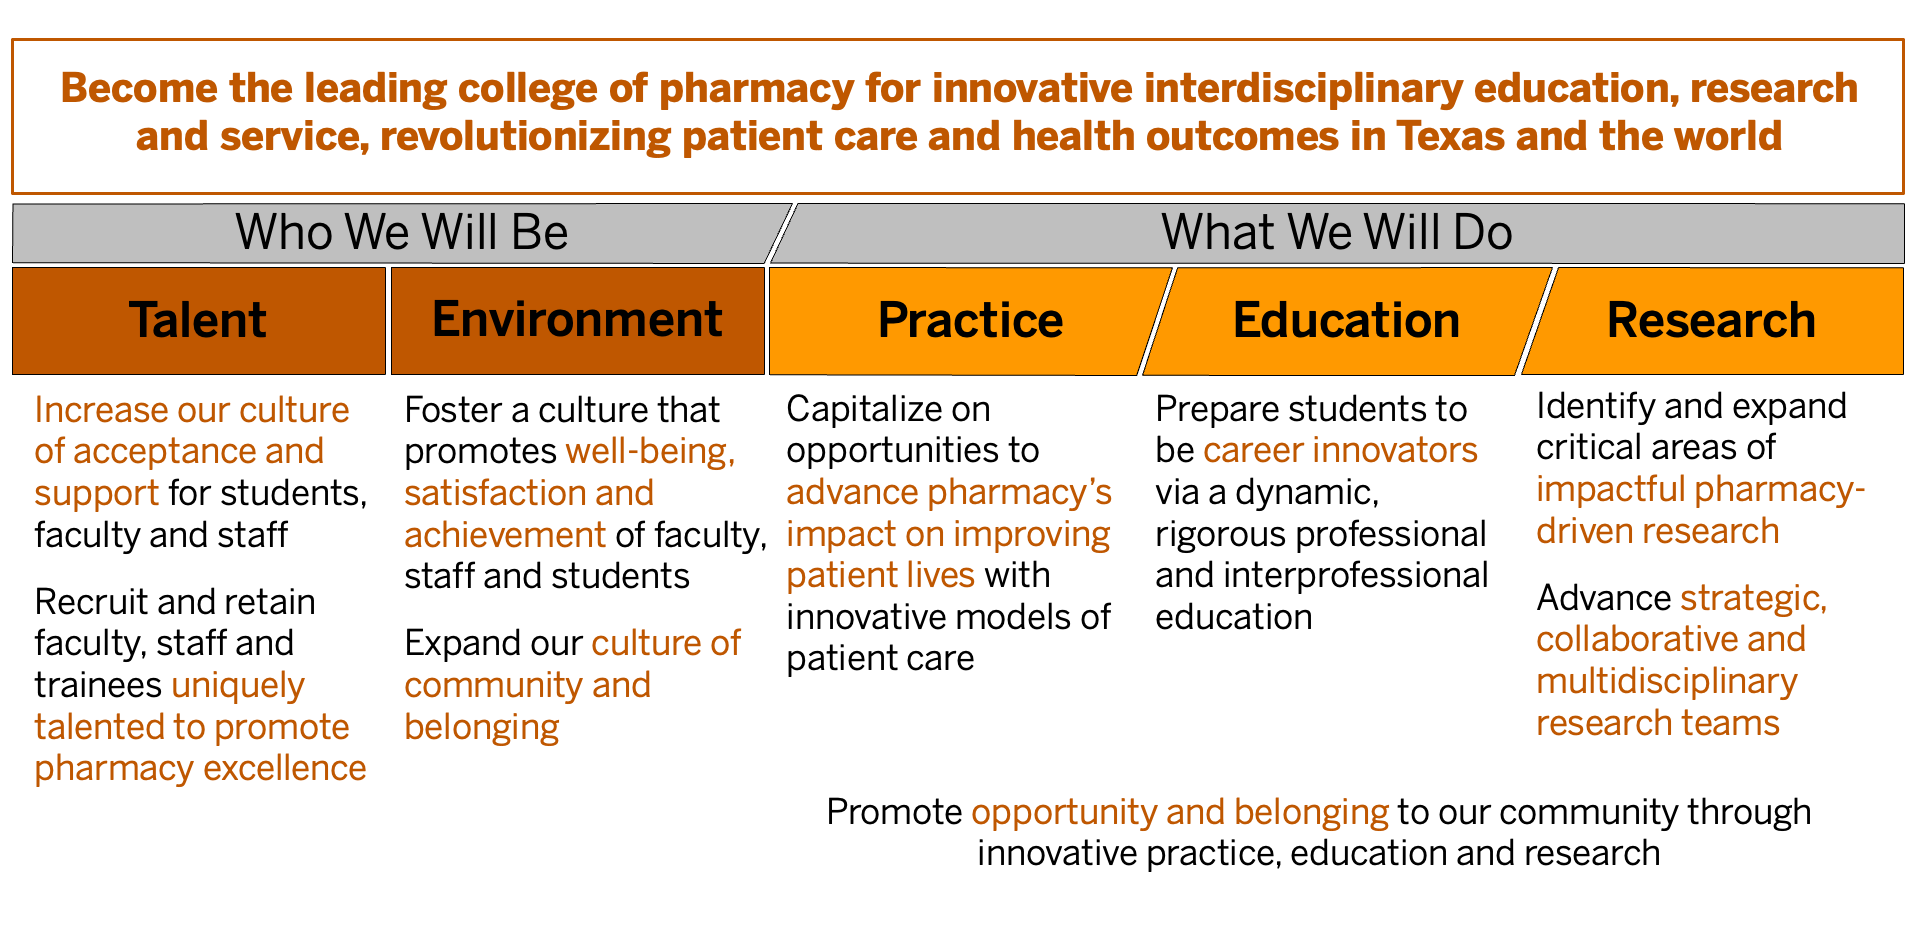 Graphical summary of Pharmacy Strategic plan - see Text Based Image Description page for full text description